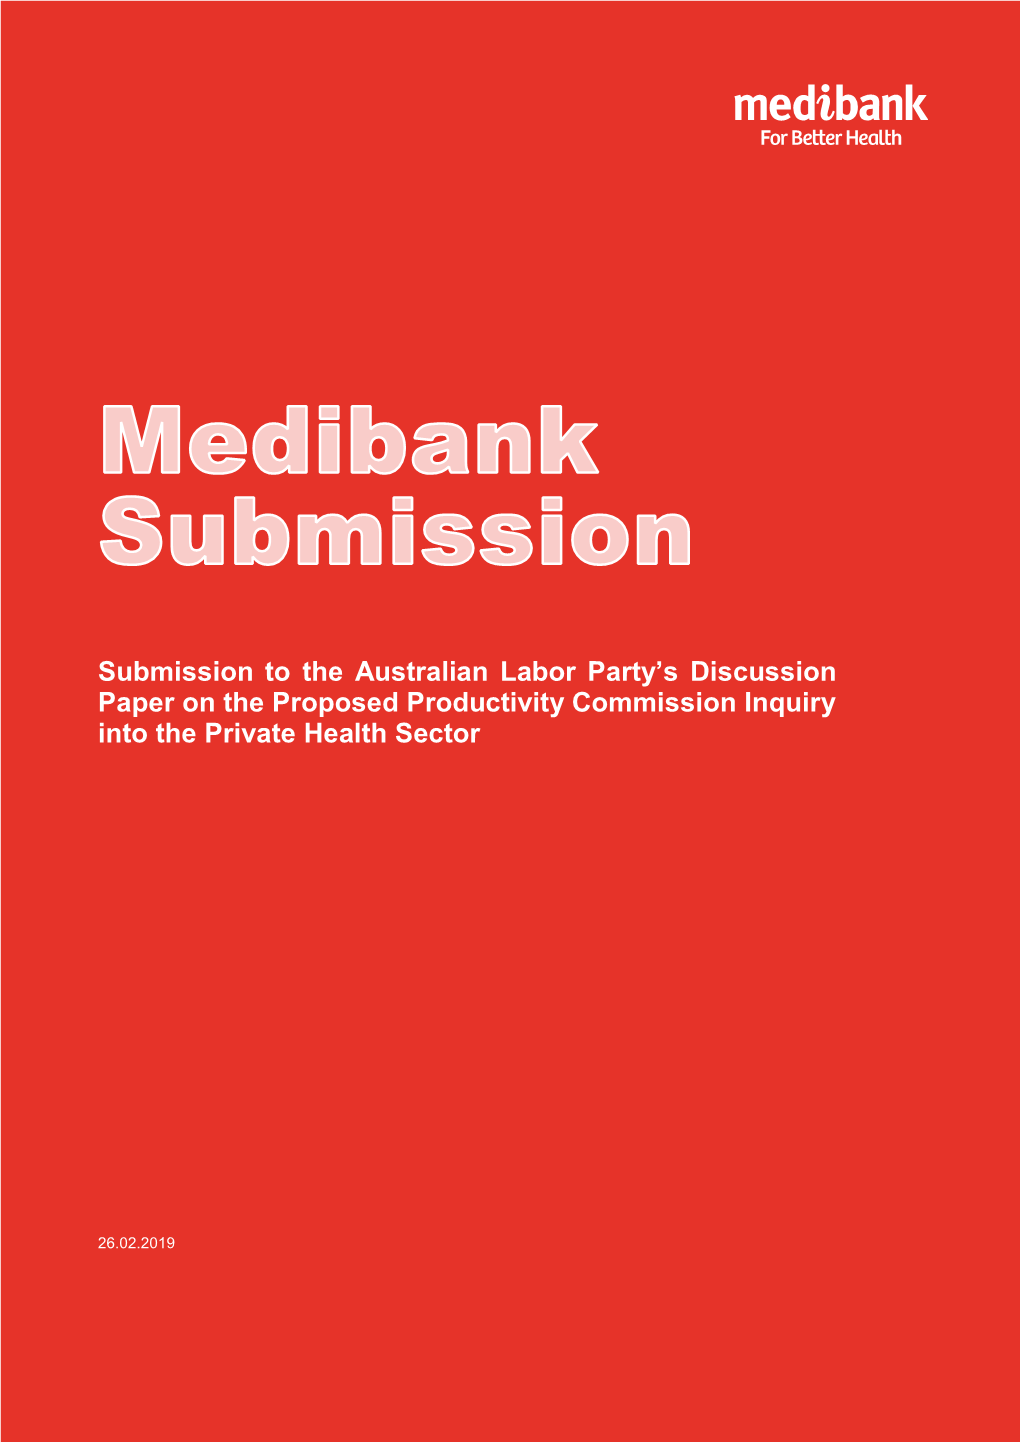 Submission to the Australian Labor Party's Discussion Paper on The